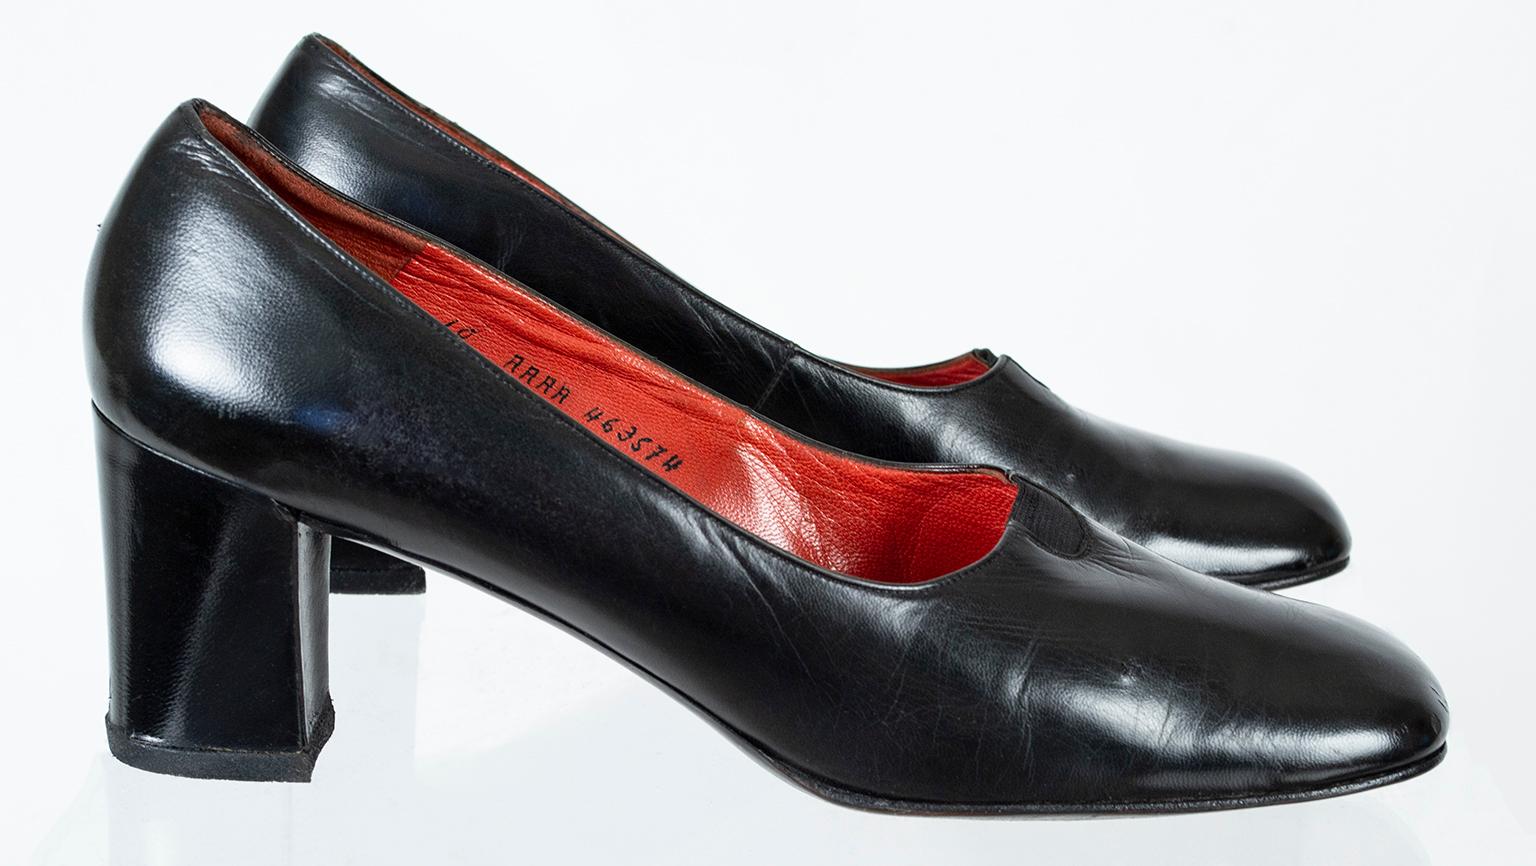 christian dior souliers